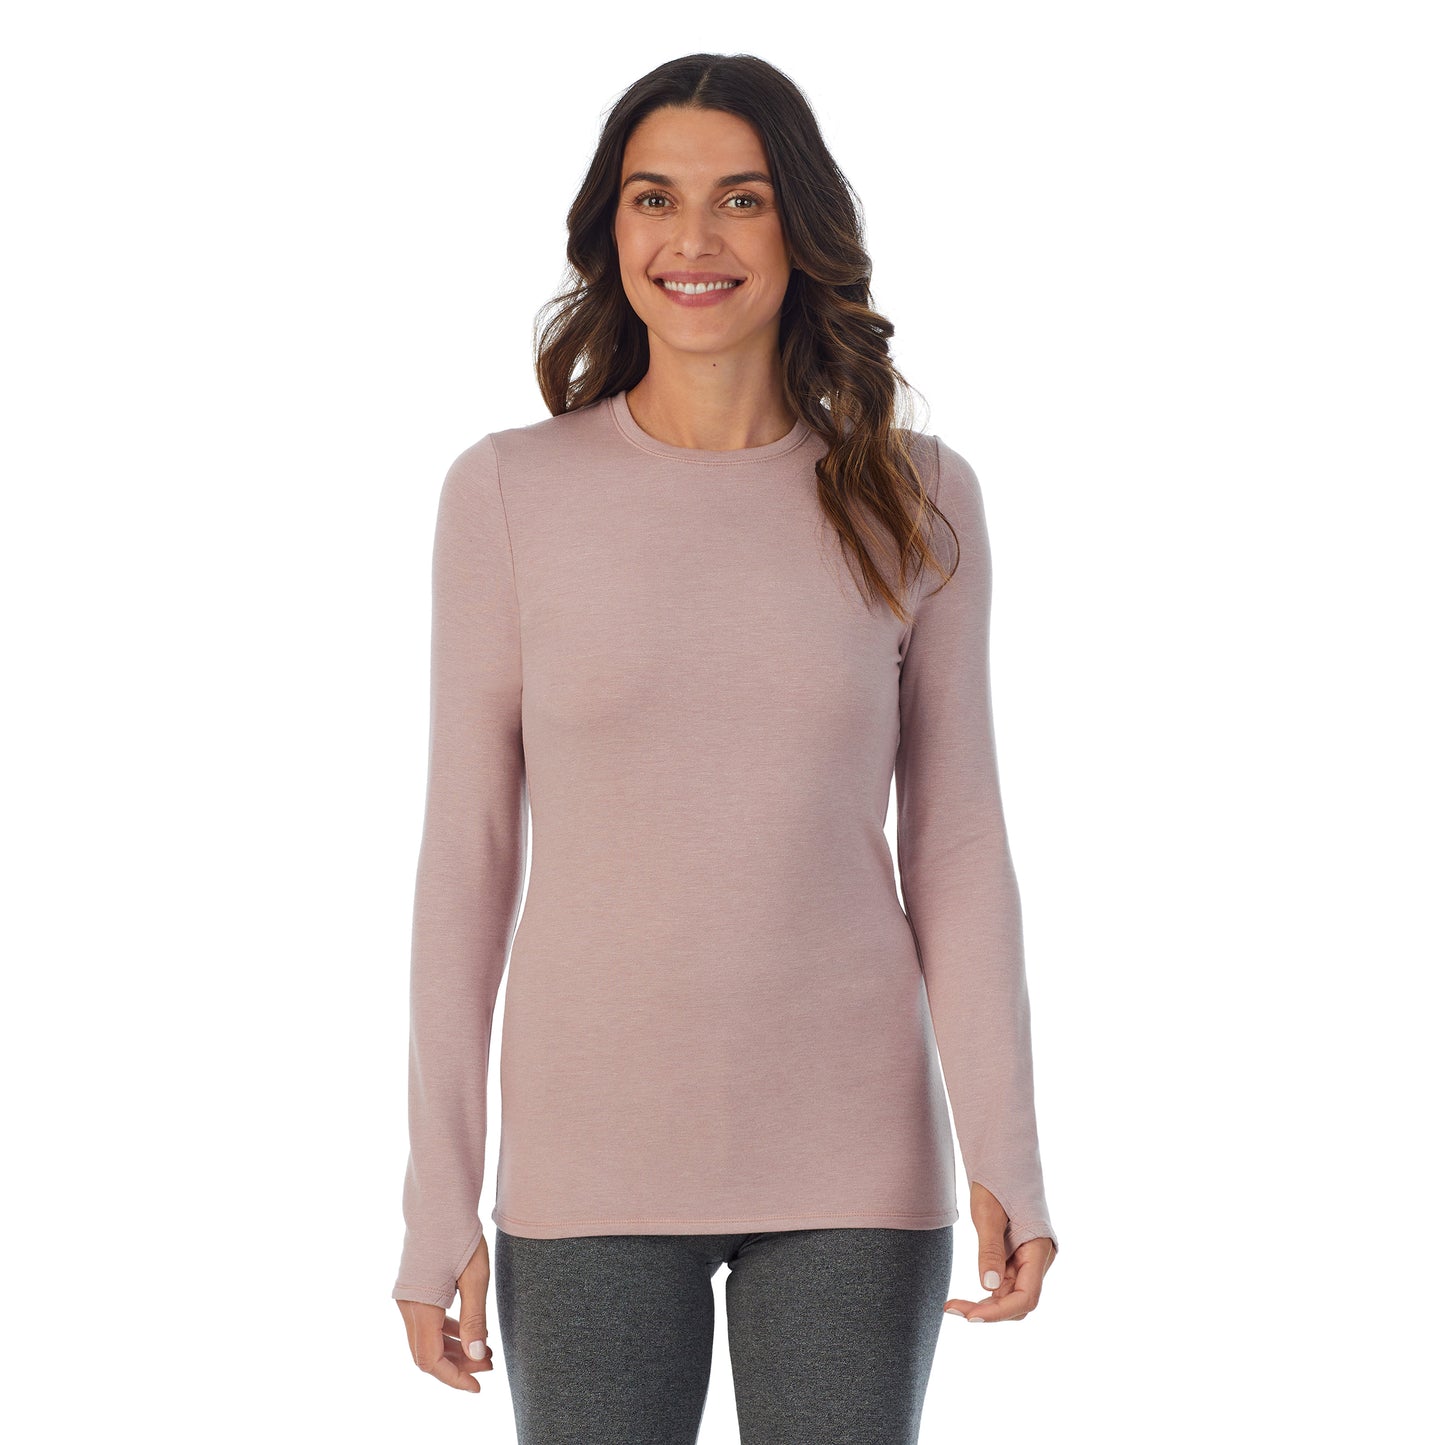 Mauve Shadow Heather; Model is wearing size S. She is 5’9”, Bust 34”, Waist 25.5”, Hips 36.5”. @A lady wearing a Mauve Shadow Heather long sleeve crew.